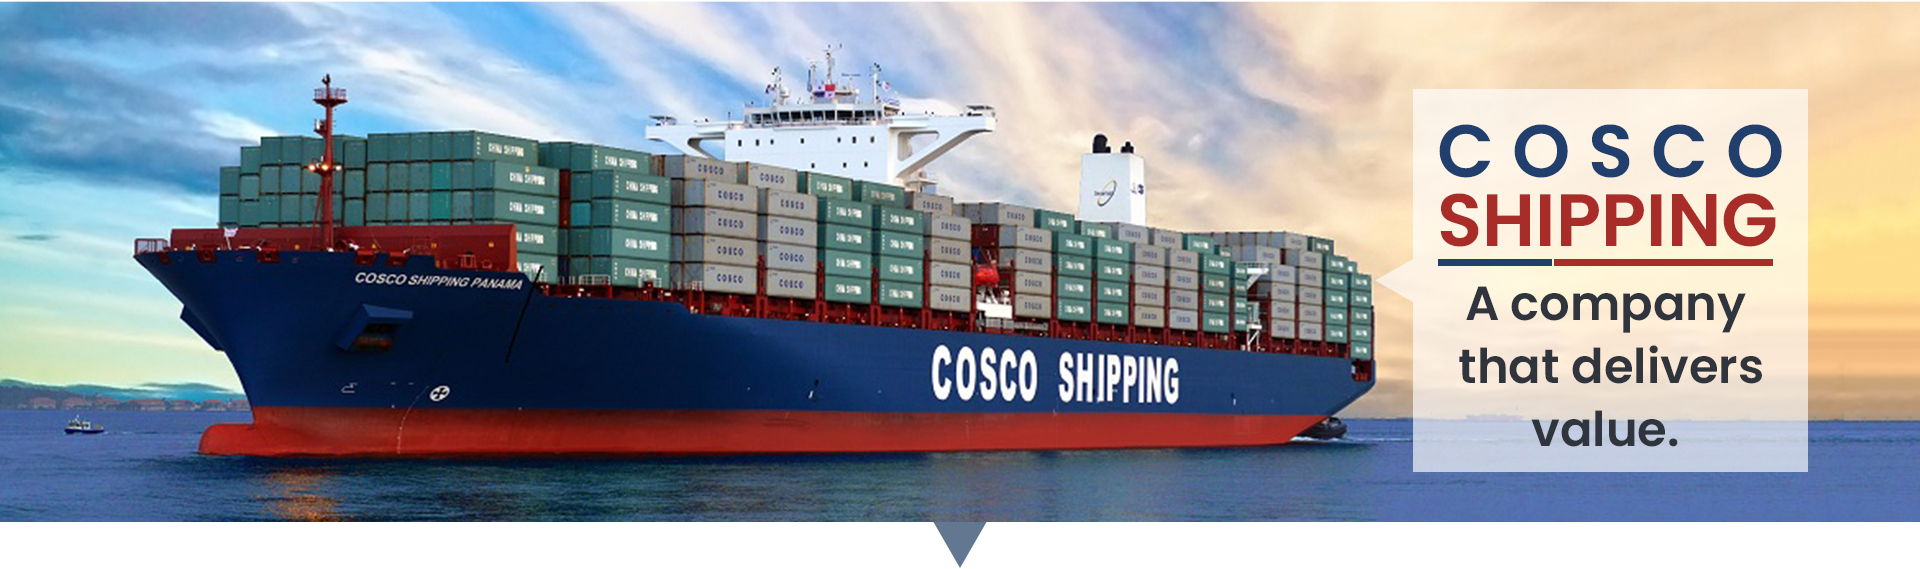 Cosco shipping, a company that delivers value FreightBro